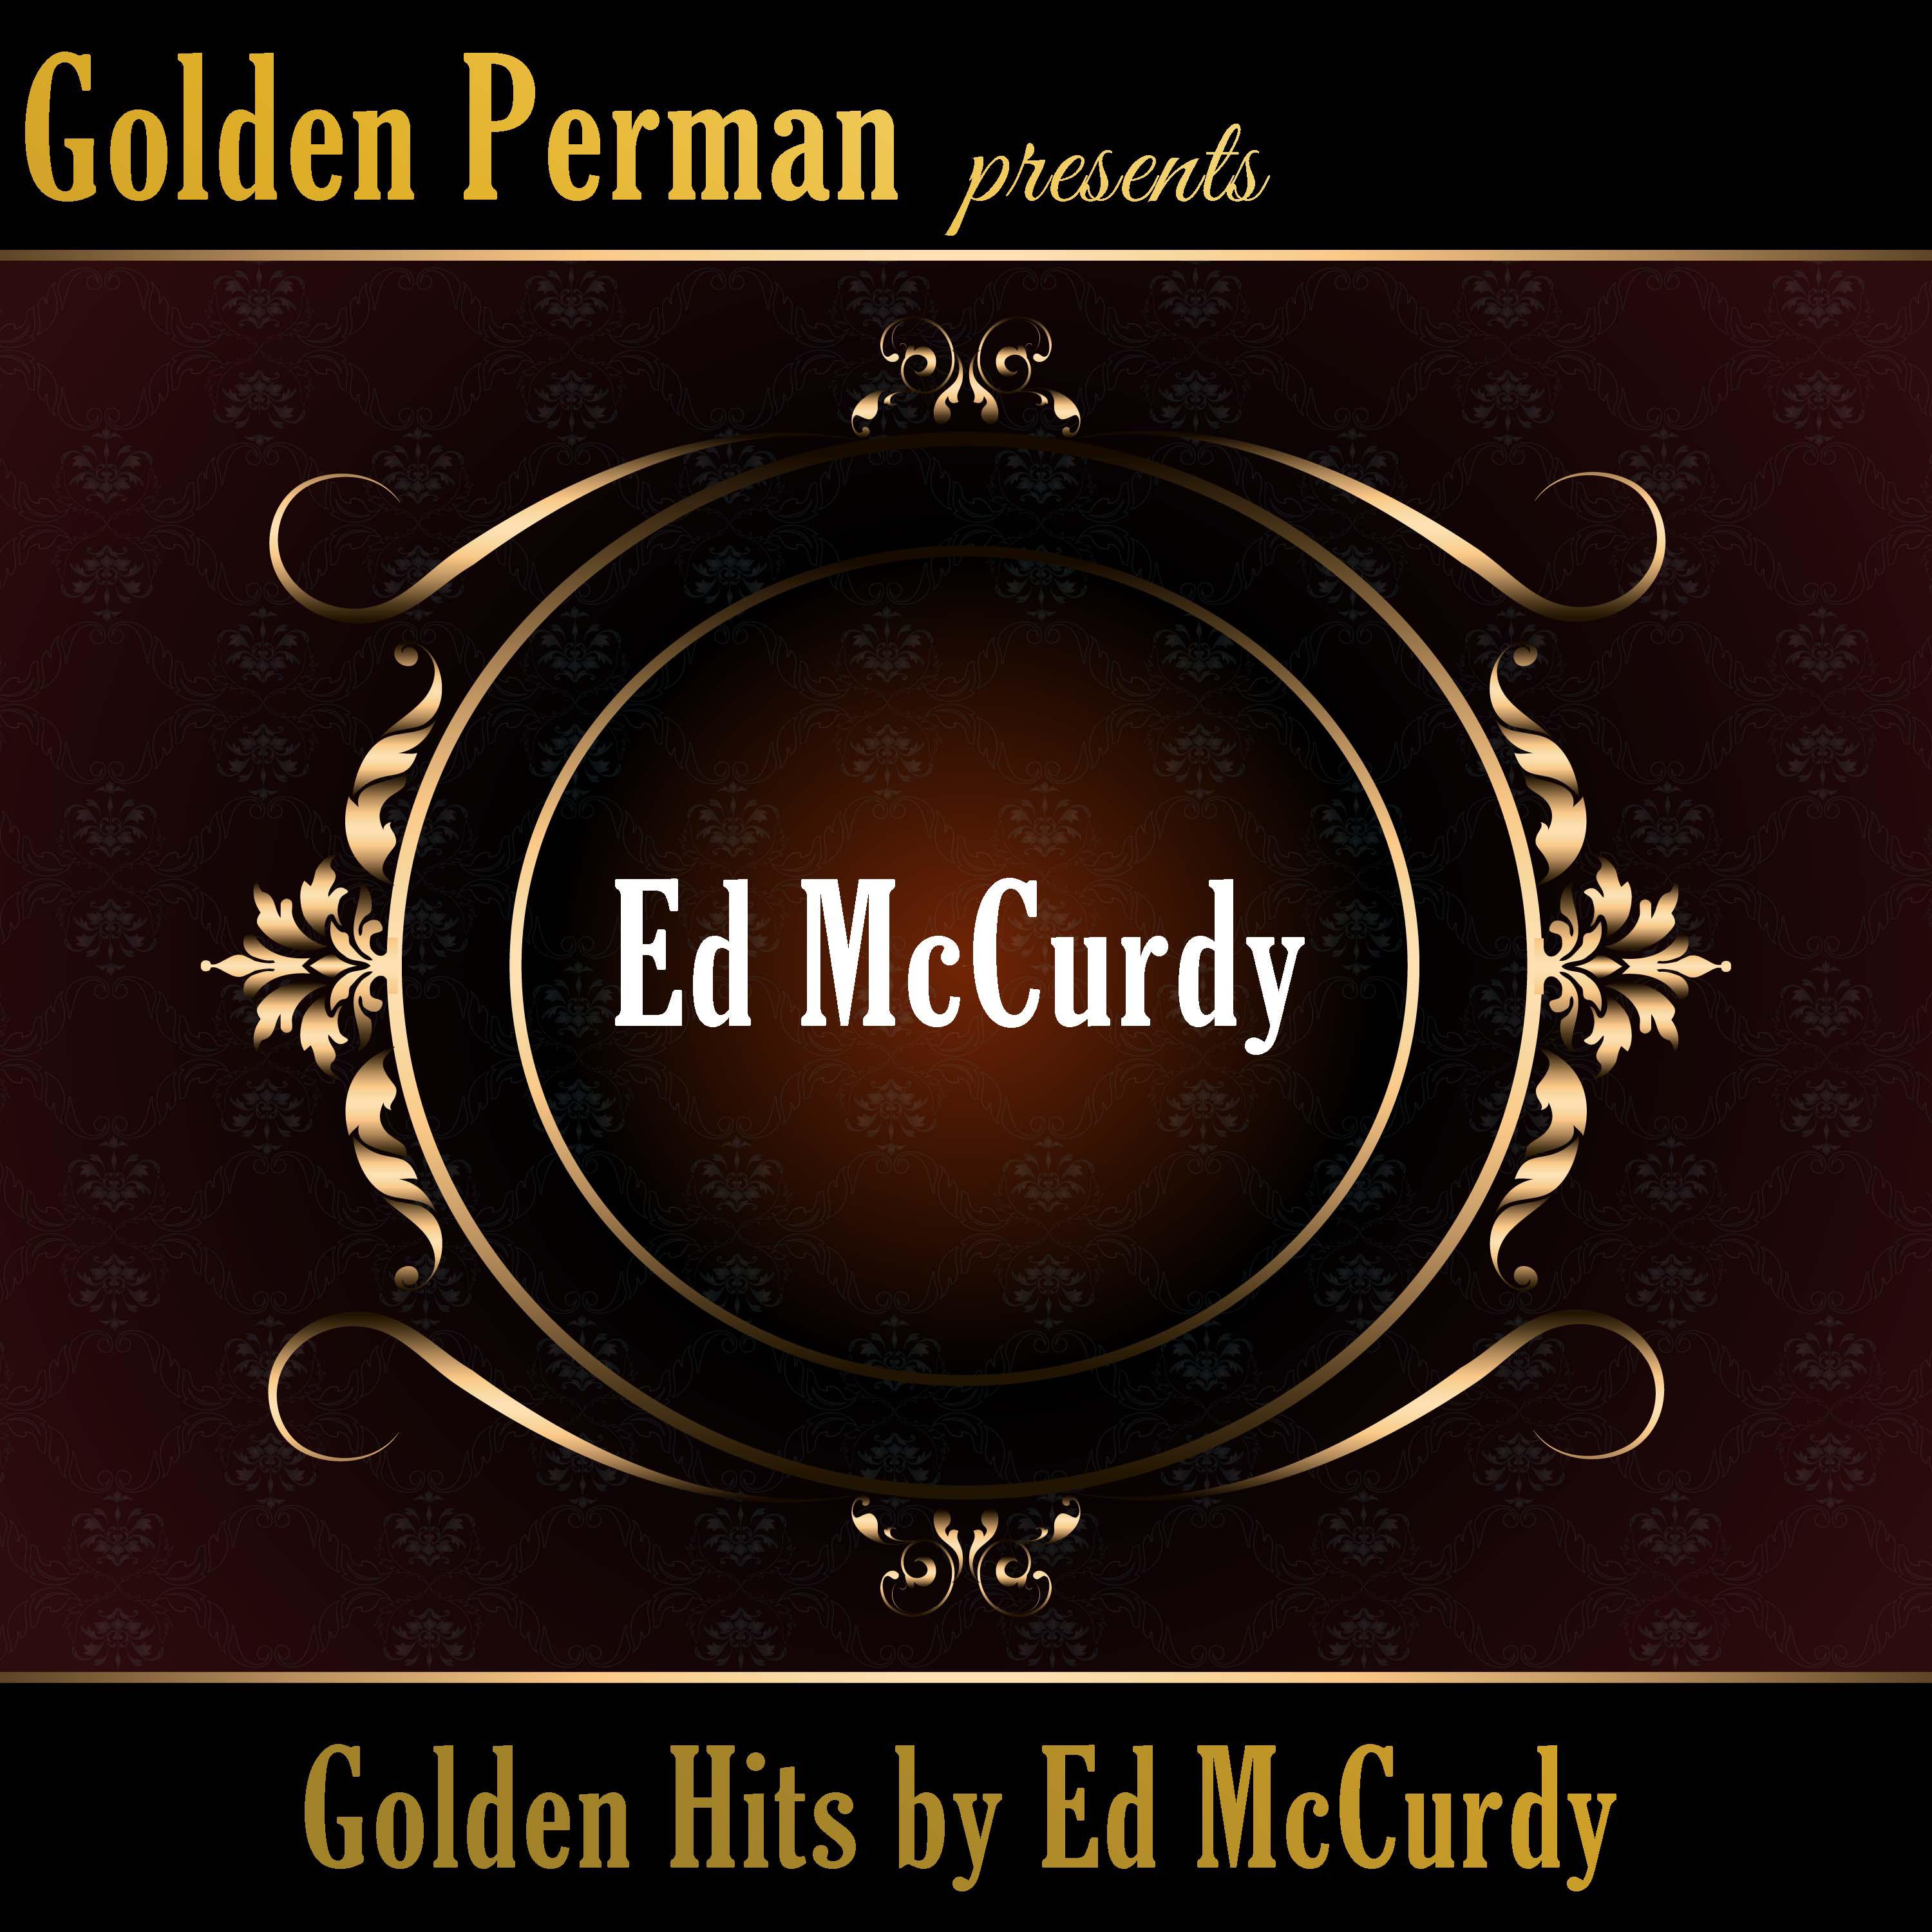 Golden Hits by Ed McCurdy